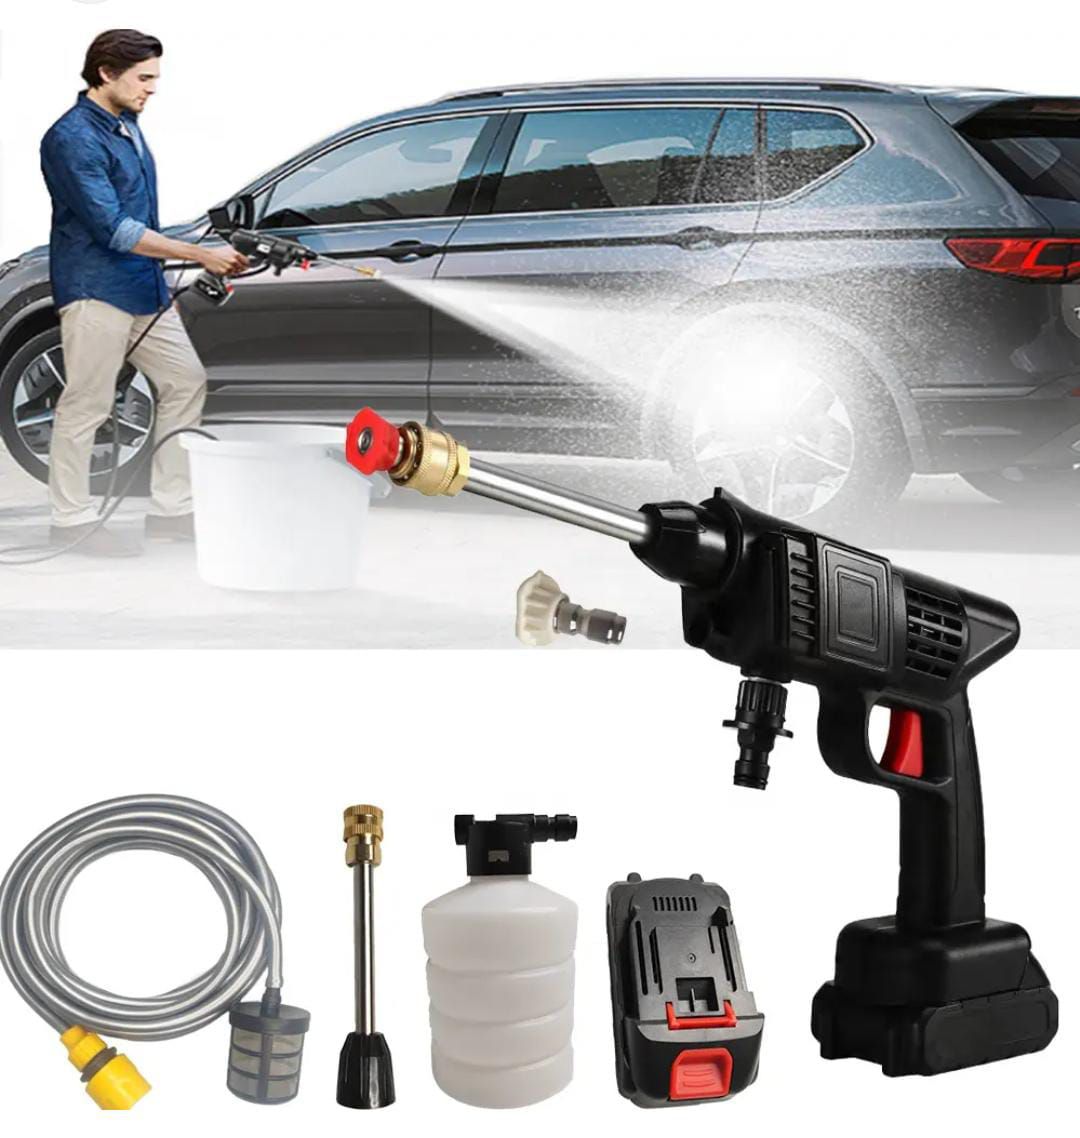 Cordless Portable High Pressure Car Washing Home Cleaning Machine with 2 Batteries